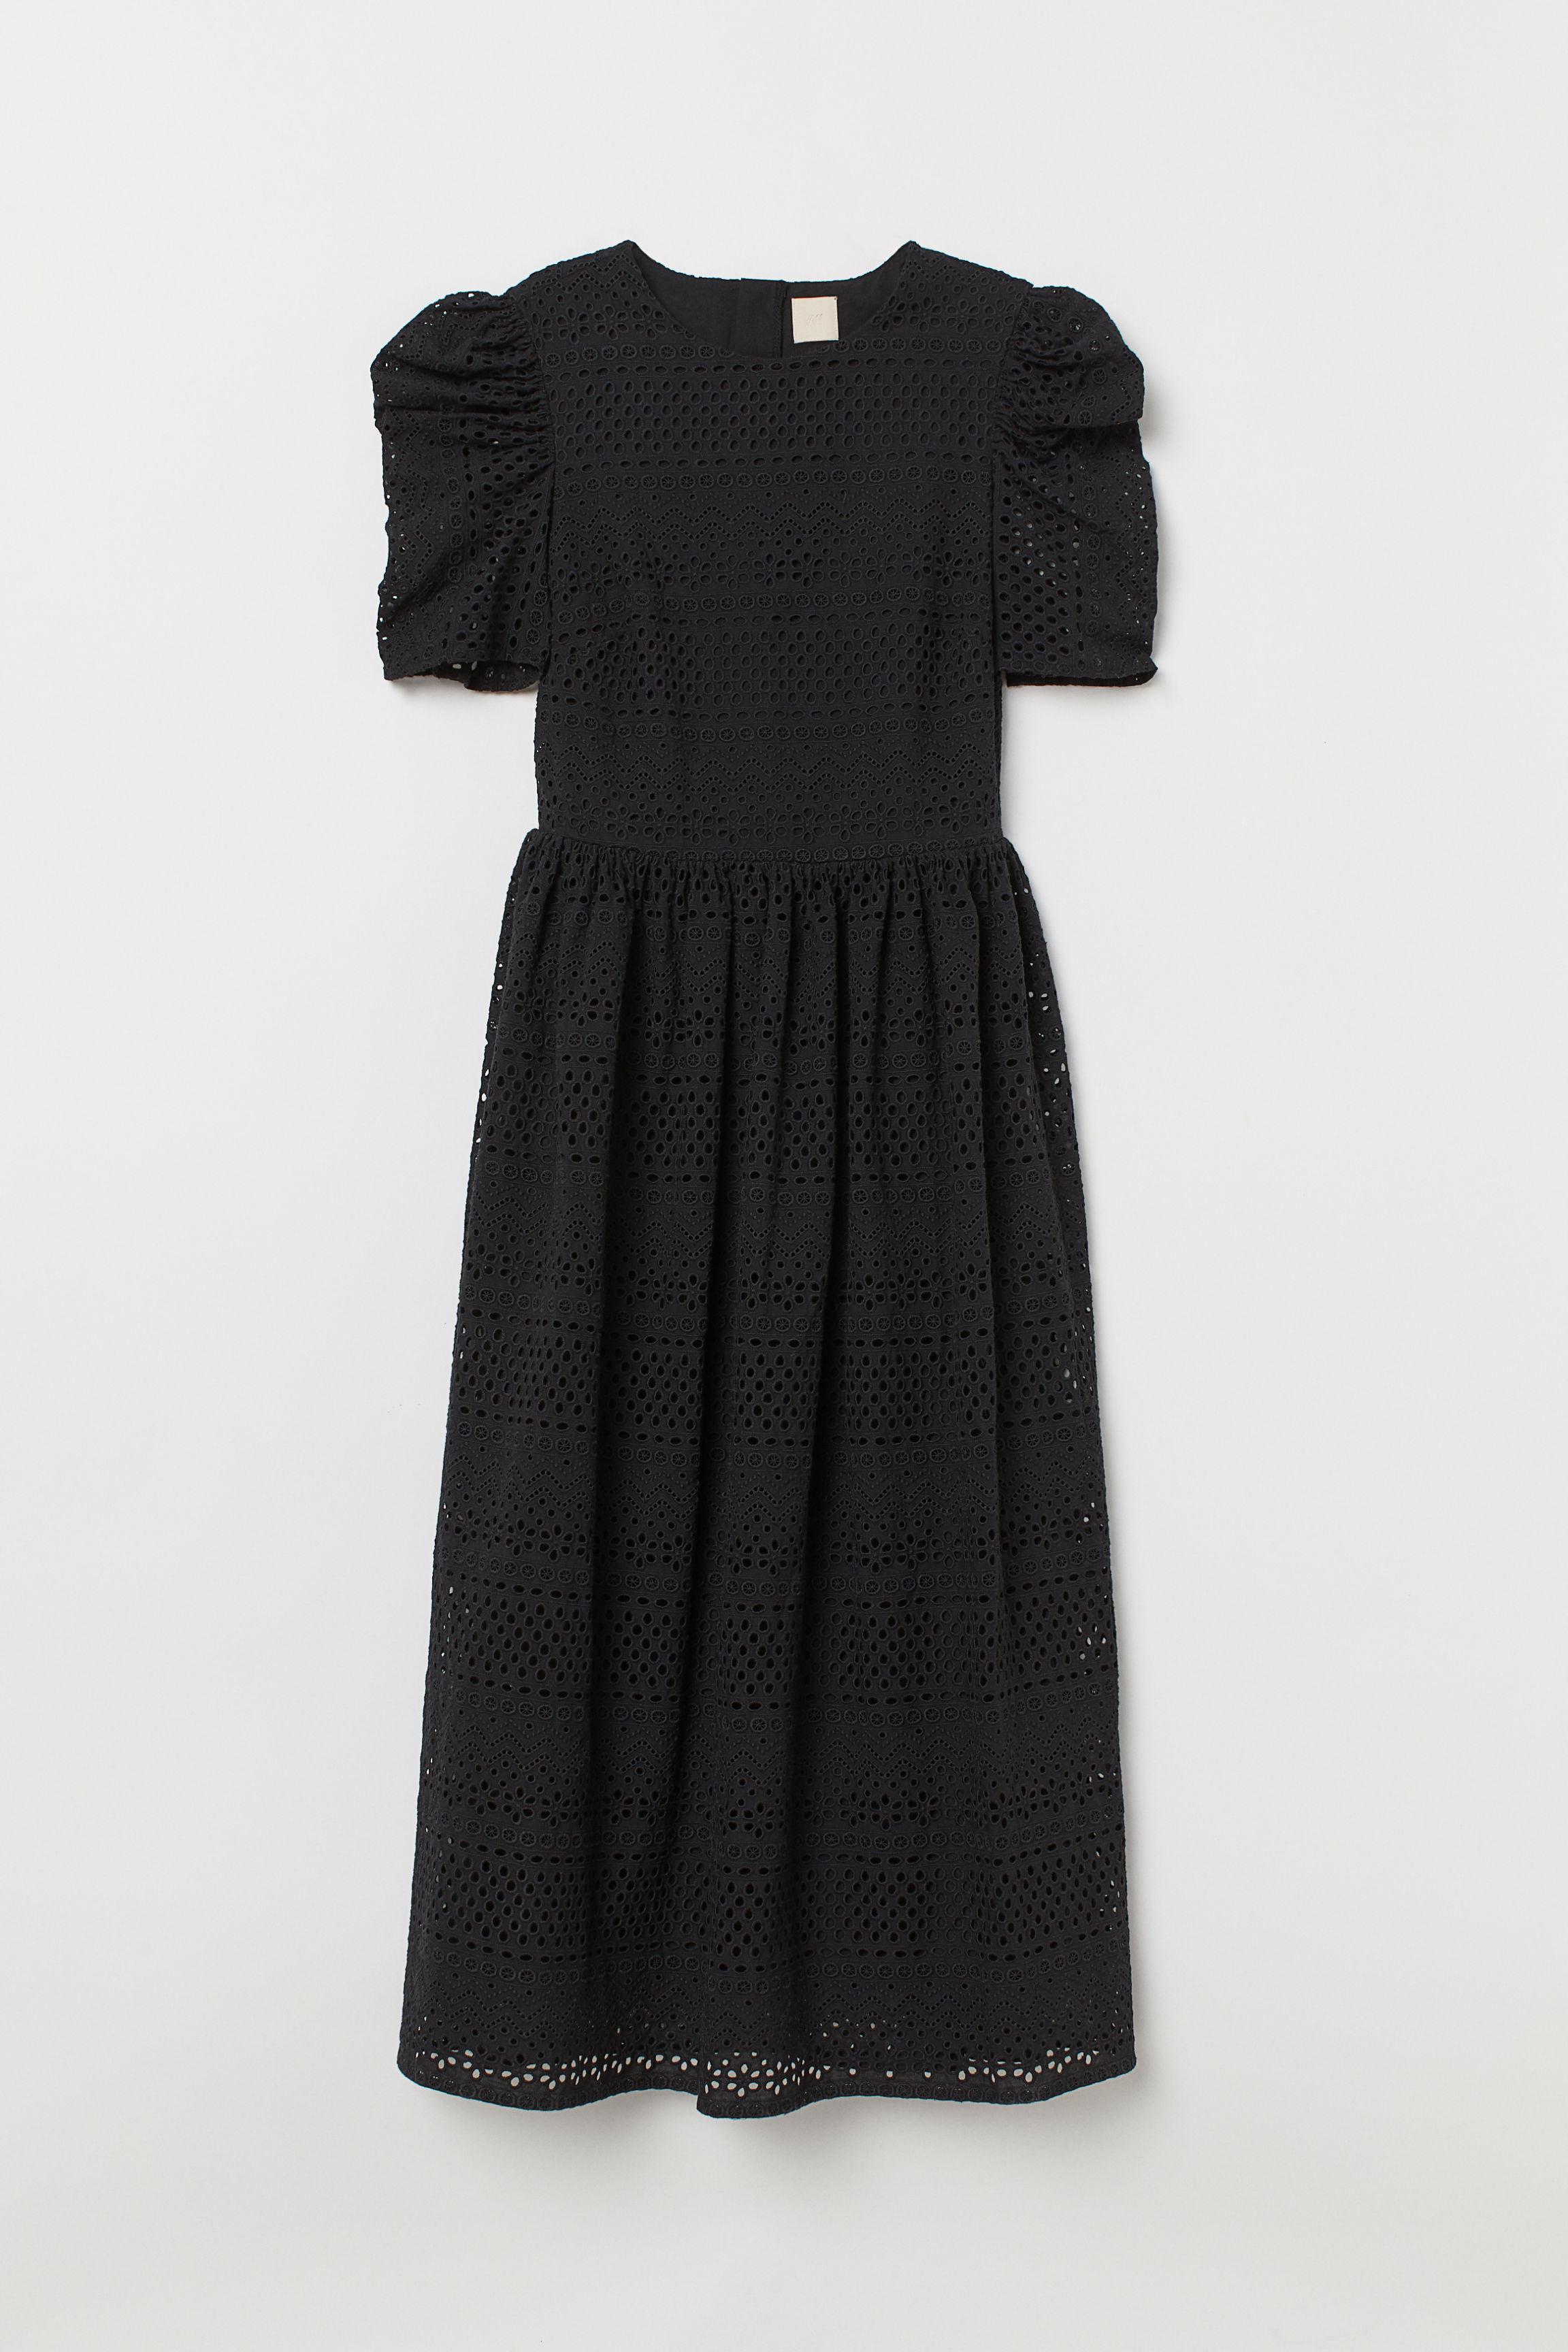 H&M Puff-sleeved Dress in Black | Lyst